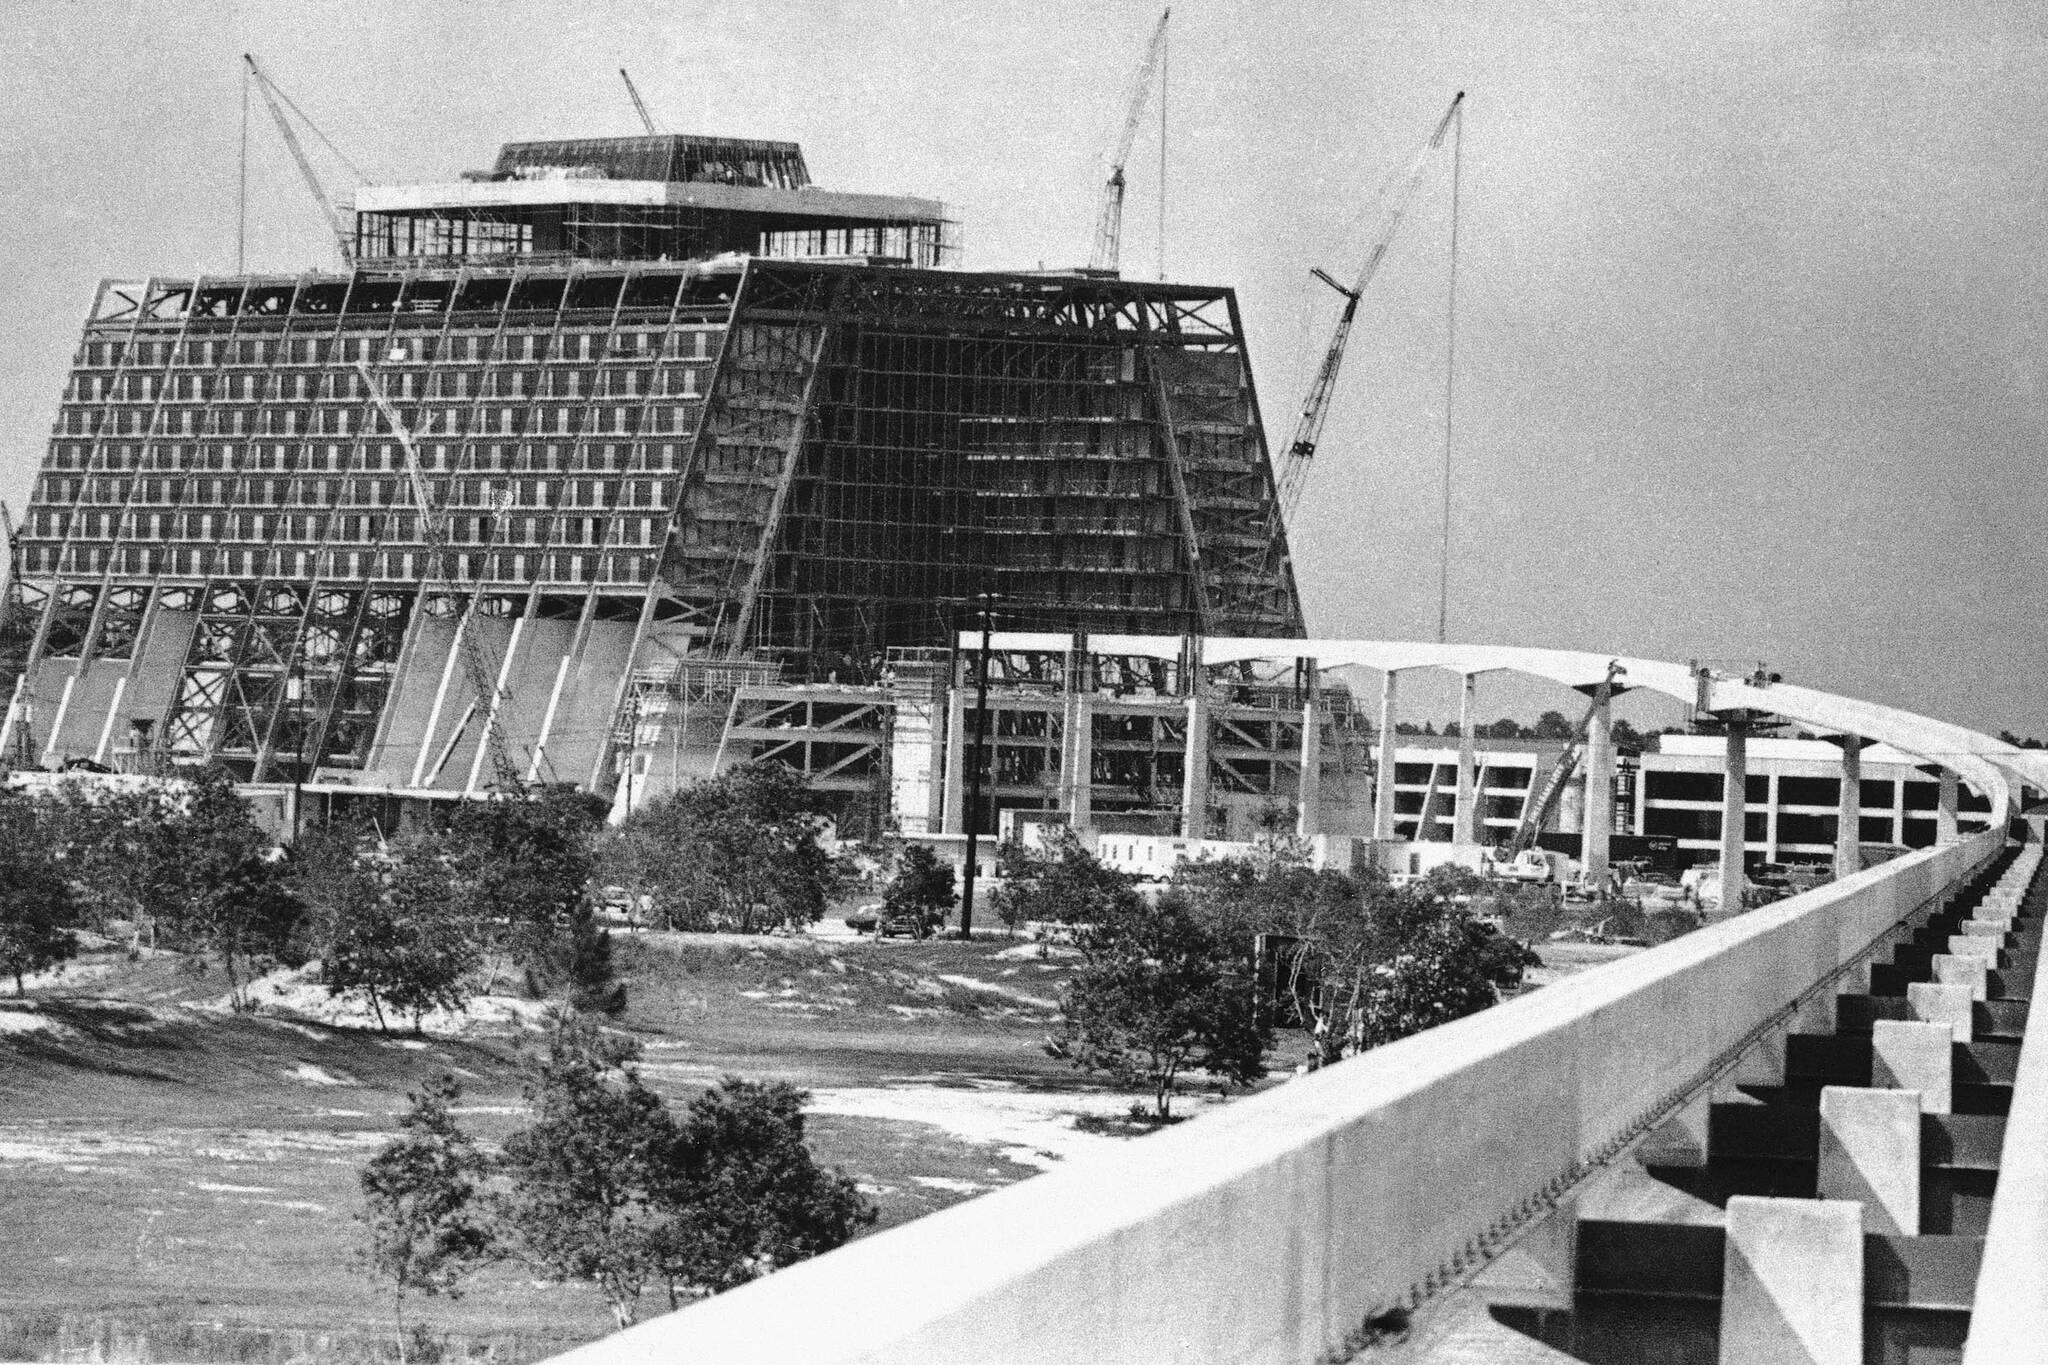 Monorail tracks and concrete pilings lead into contemporary hotel under construction at Walt Disney World July 7, 1971 Orlando, Florida. The idea was presented to Florida lawmakers in a movie house outside Orlando, Florida 55 years ago: Let Disney form its own government and in exchange it would create a futuristic city of tomorrow. (AP Photo/SDS)